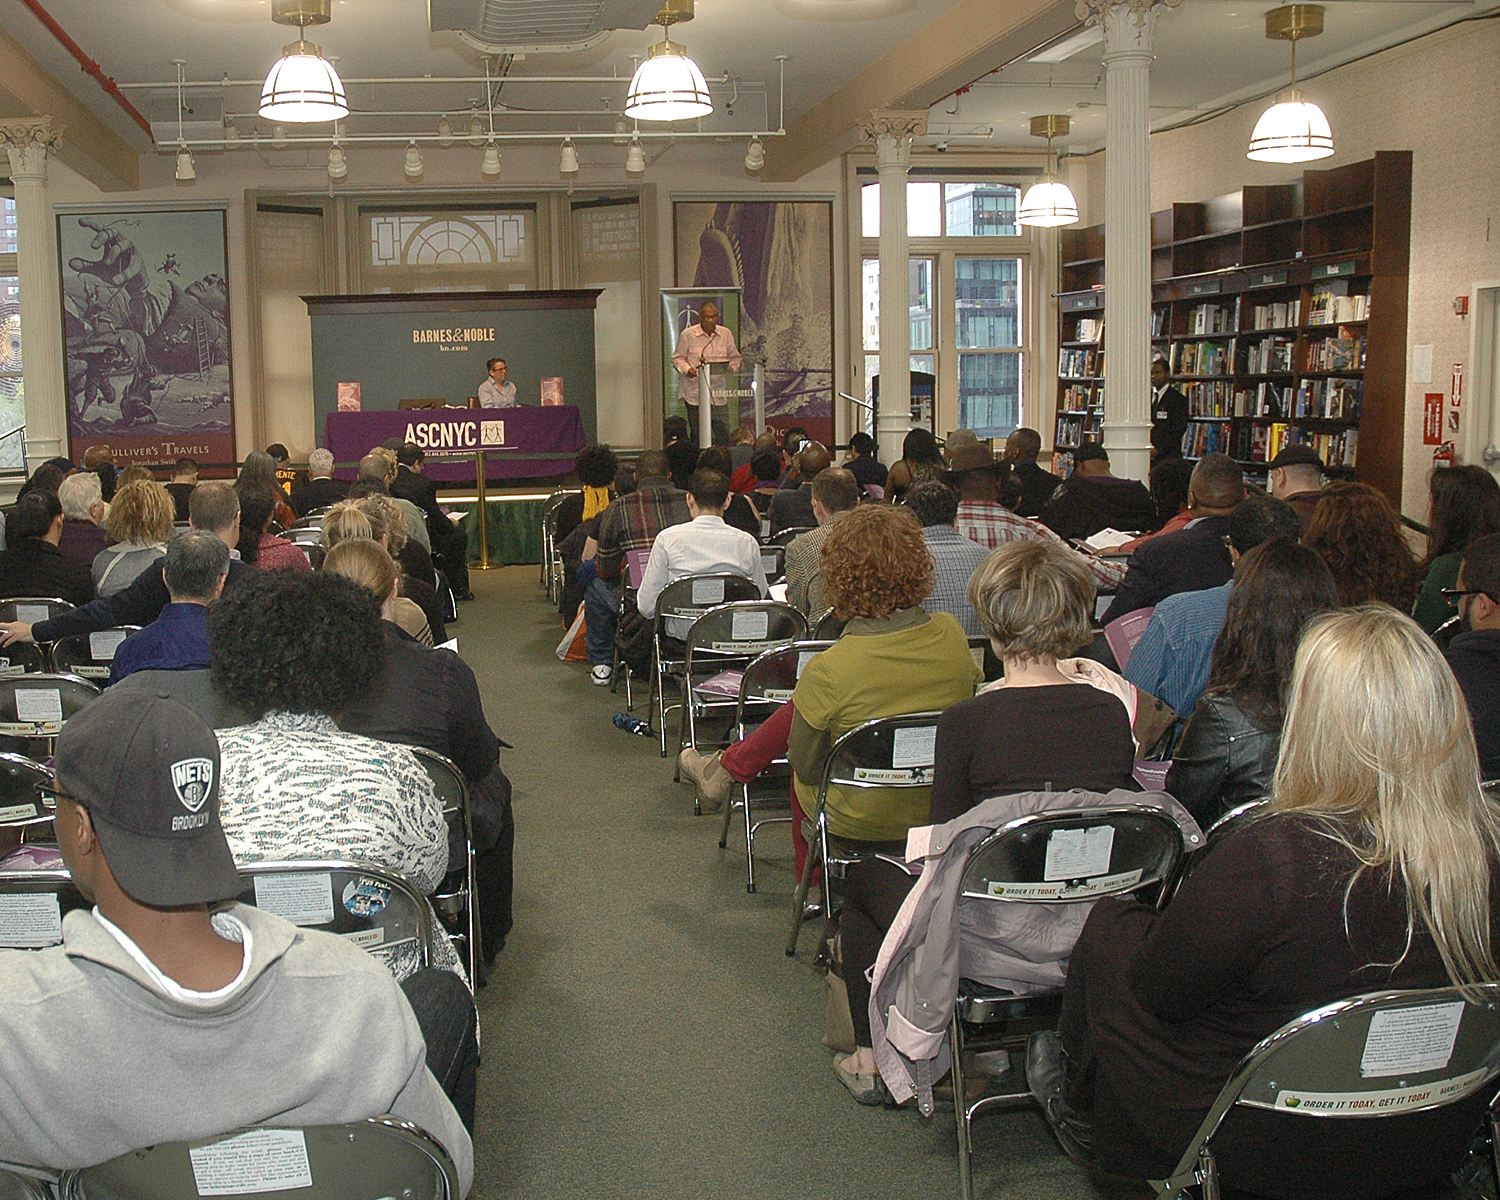 A full house at the poetry reading